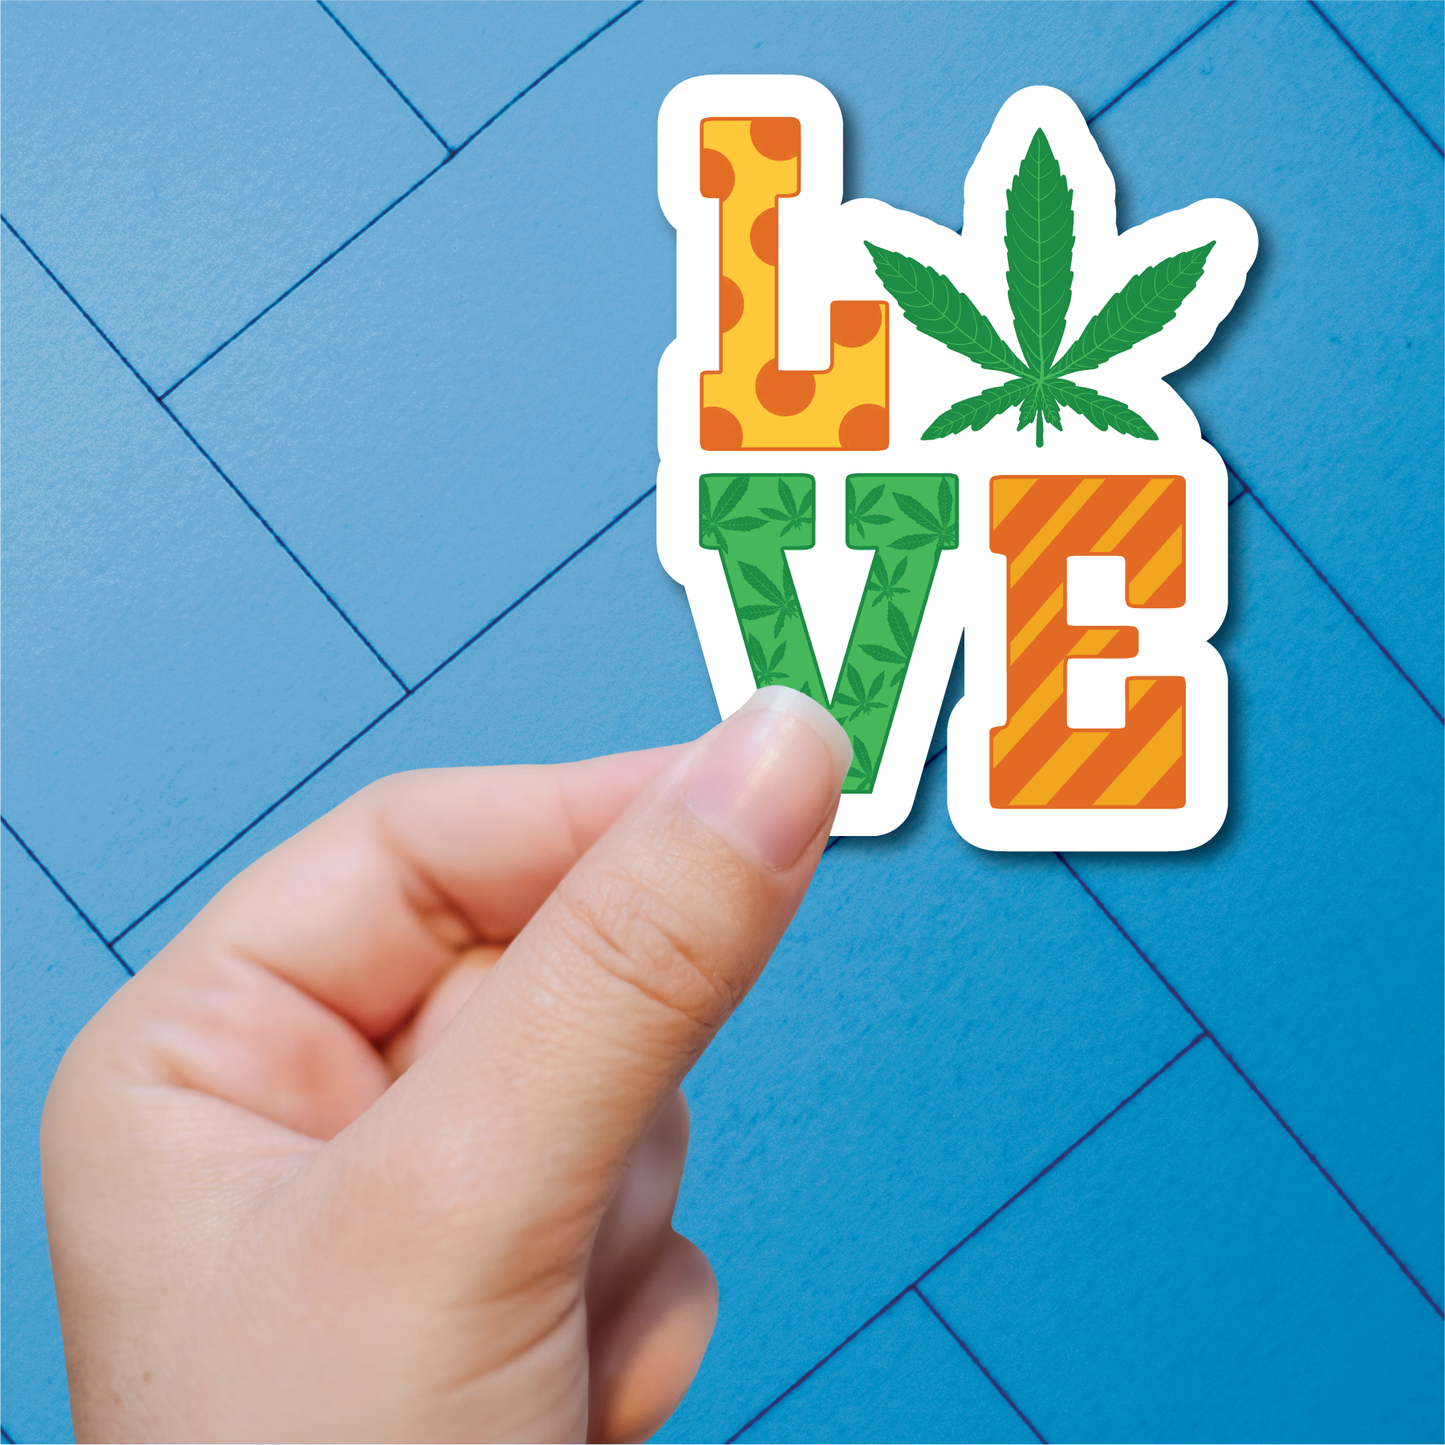 Fun Weed - Full Color Vinyl Stickers (SHIPS IN 3-7 BUS DAYS)